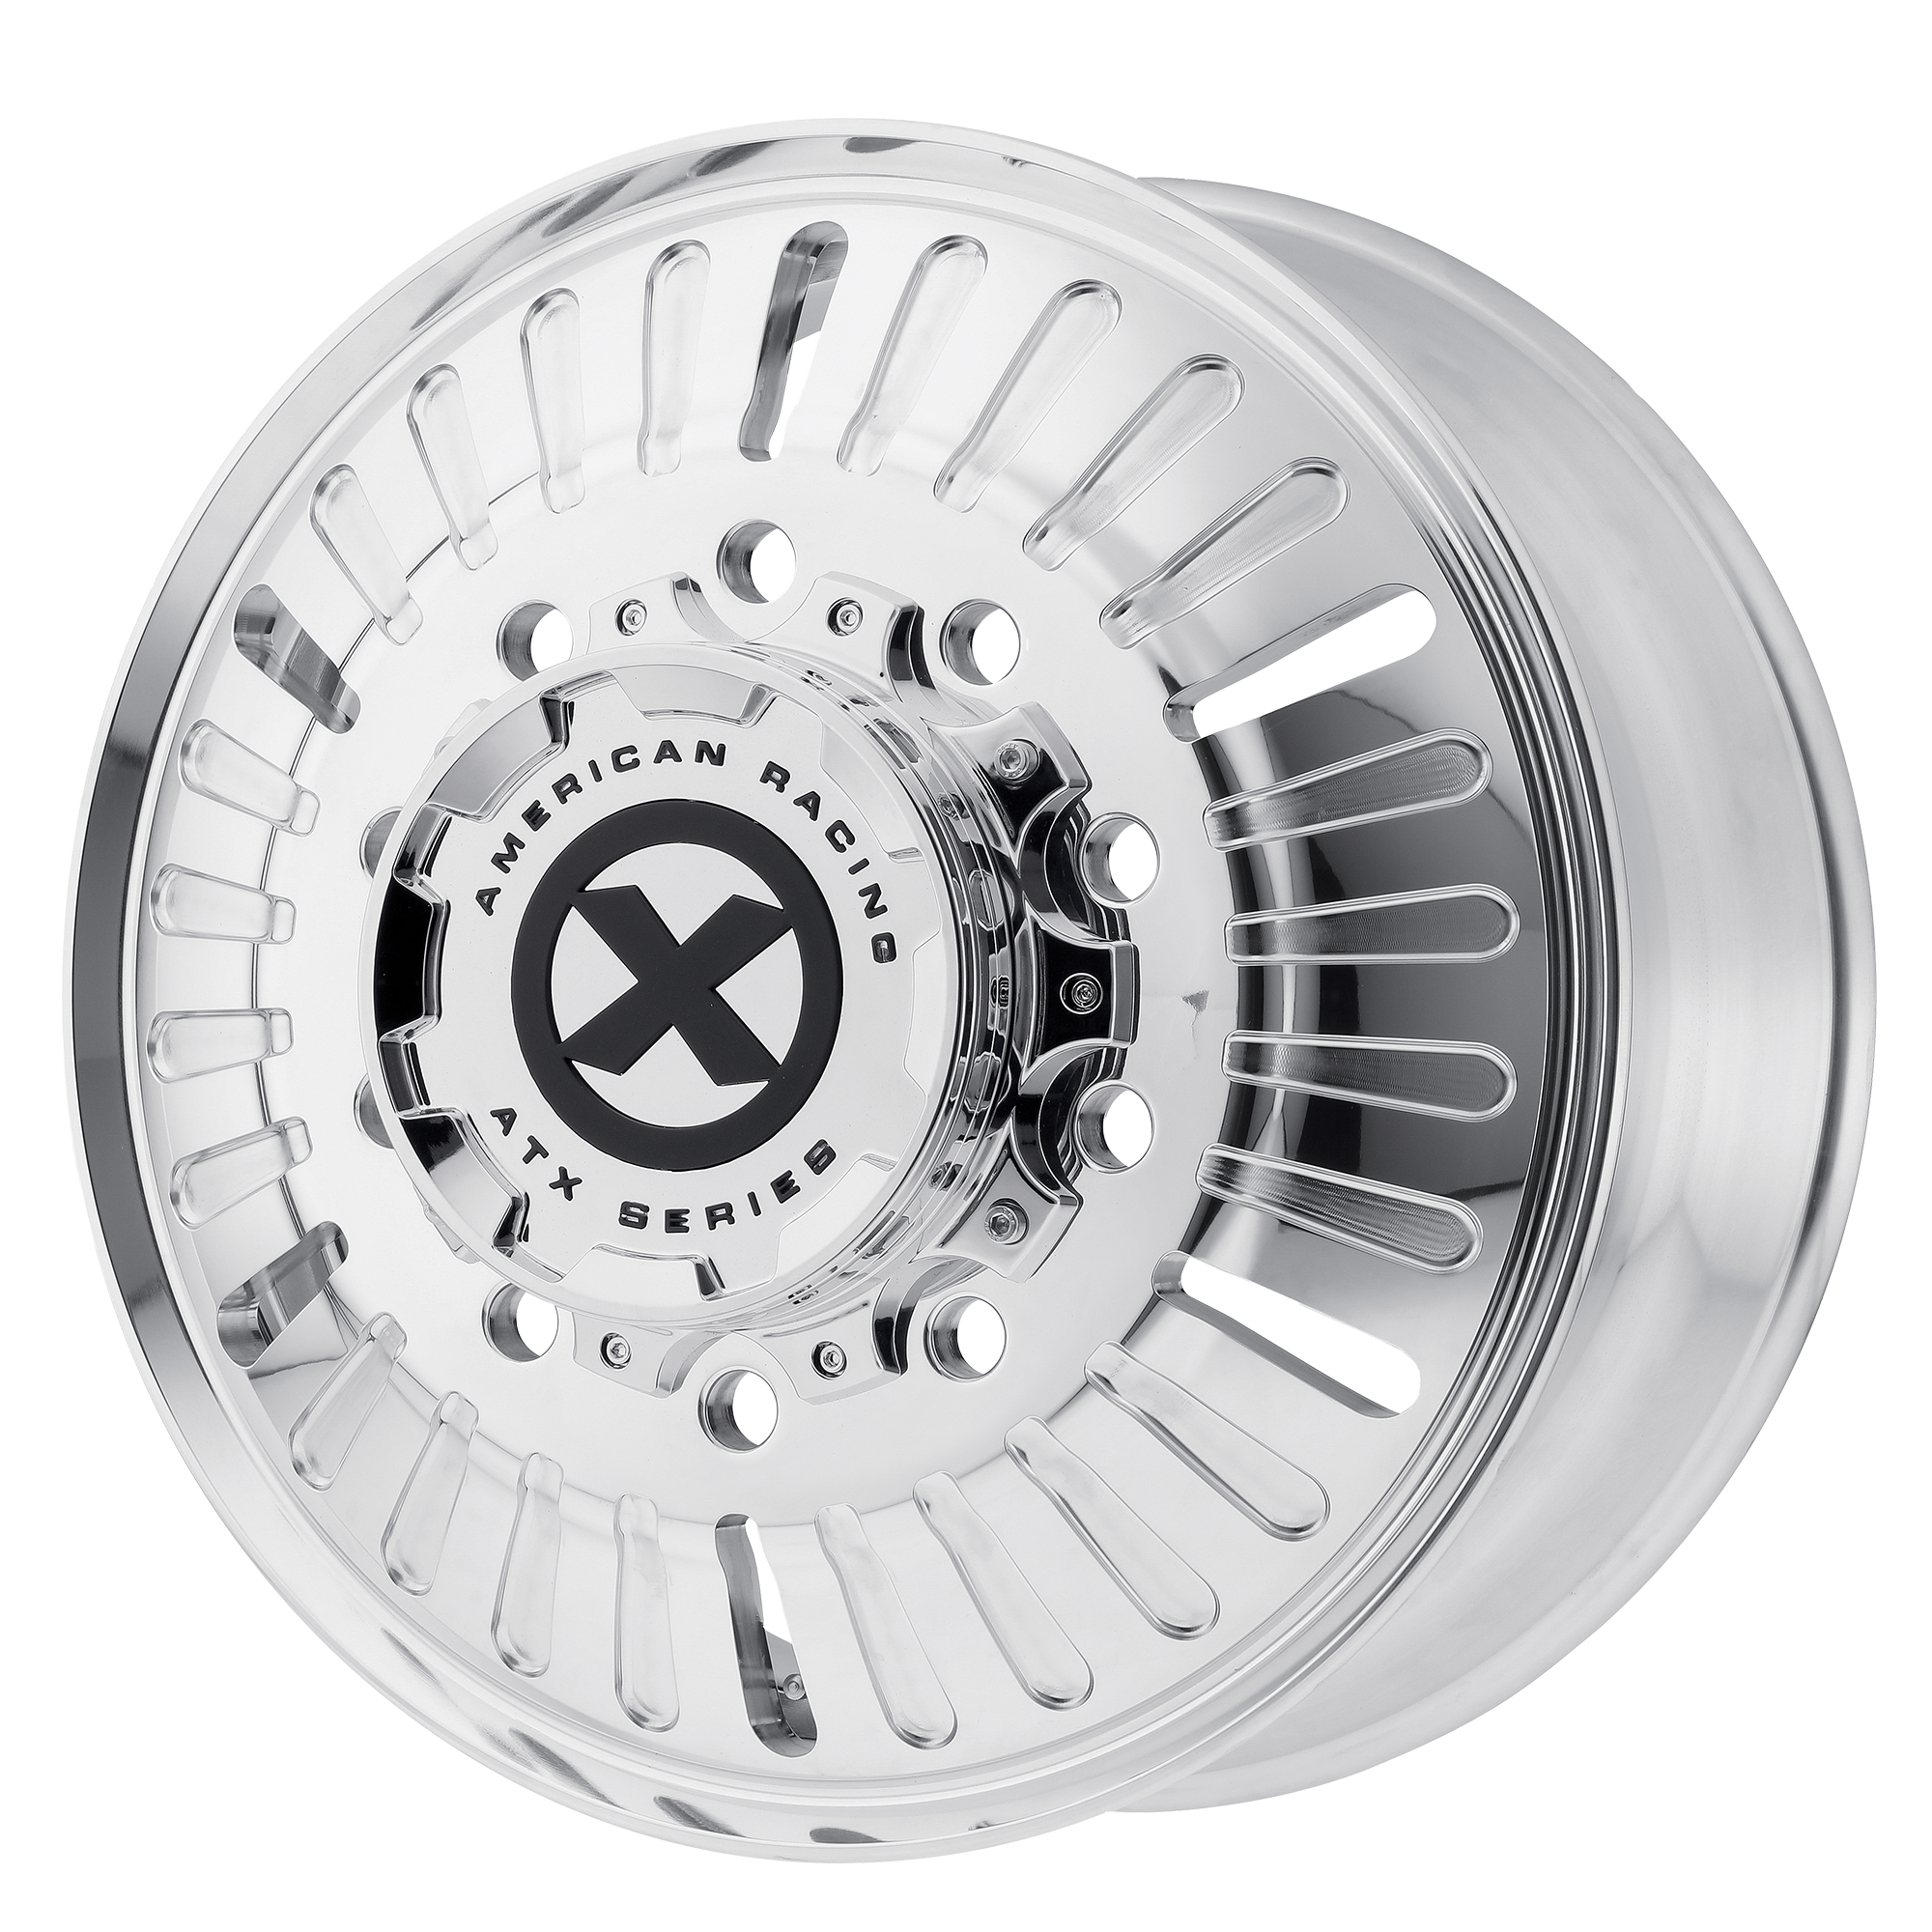 ATX AO403 ROULETTE 24.5X8.25 144 10X285.75/10X11.25 Polished - Front